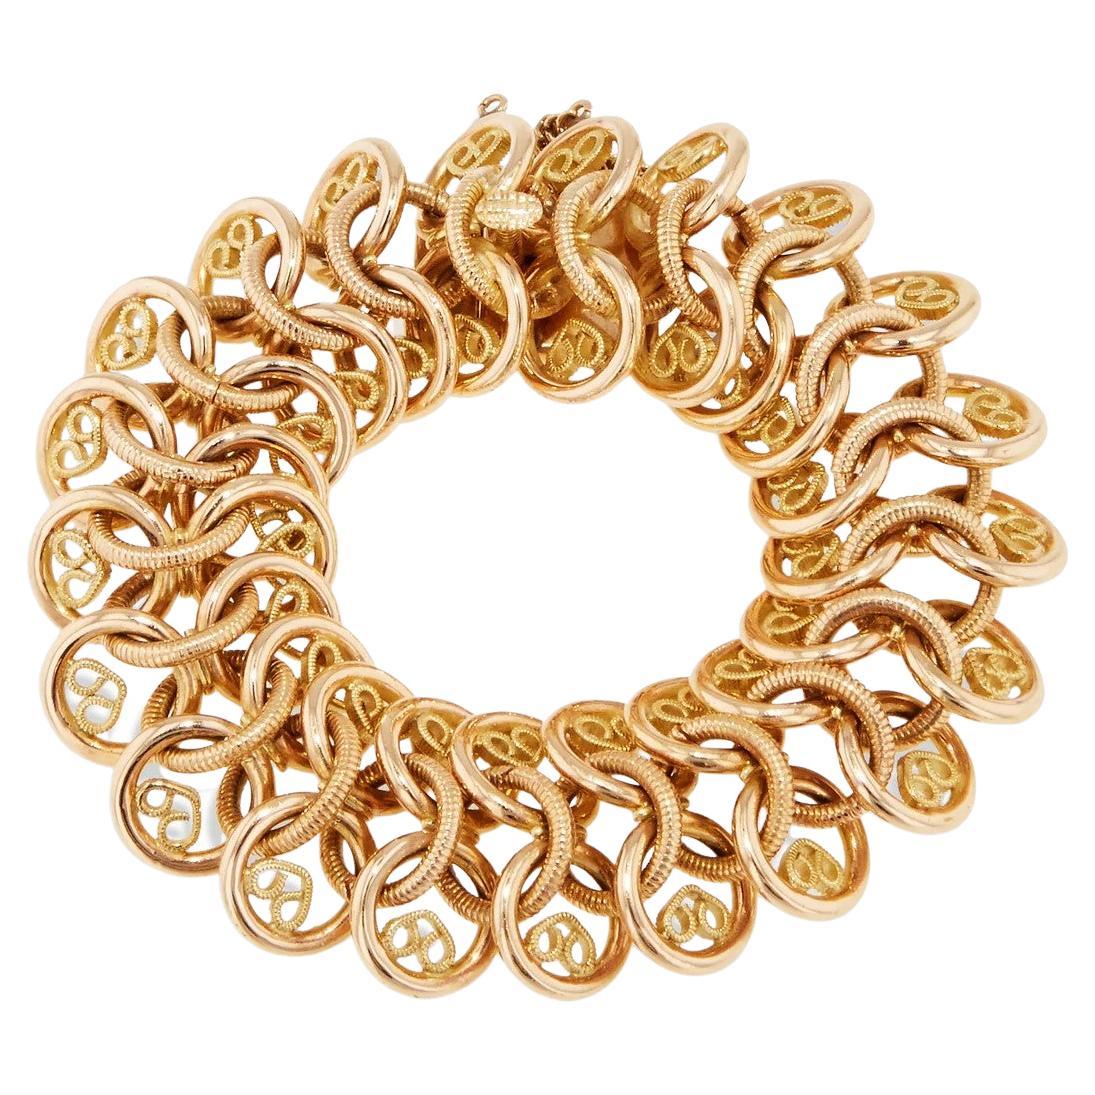 This luxurious 18kt rose and yellow gold bracelet is perfect for any special occasion. Measuring 24mm in width and 7 inches in length, this piece reflects the highest quality of craftsmanship.
18kt. Rose and Yellow gold Bracelet 

Bracelet

24mm